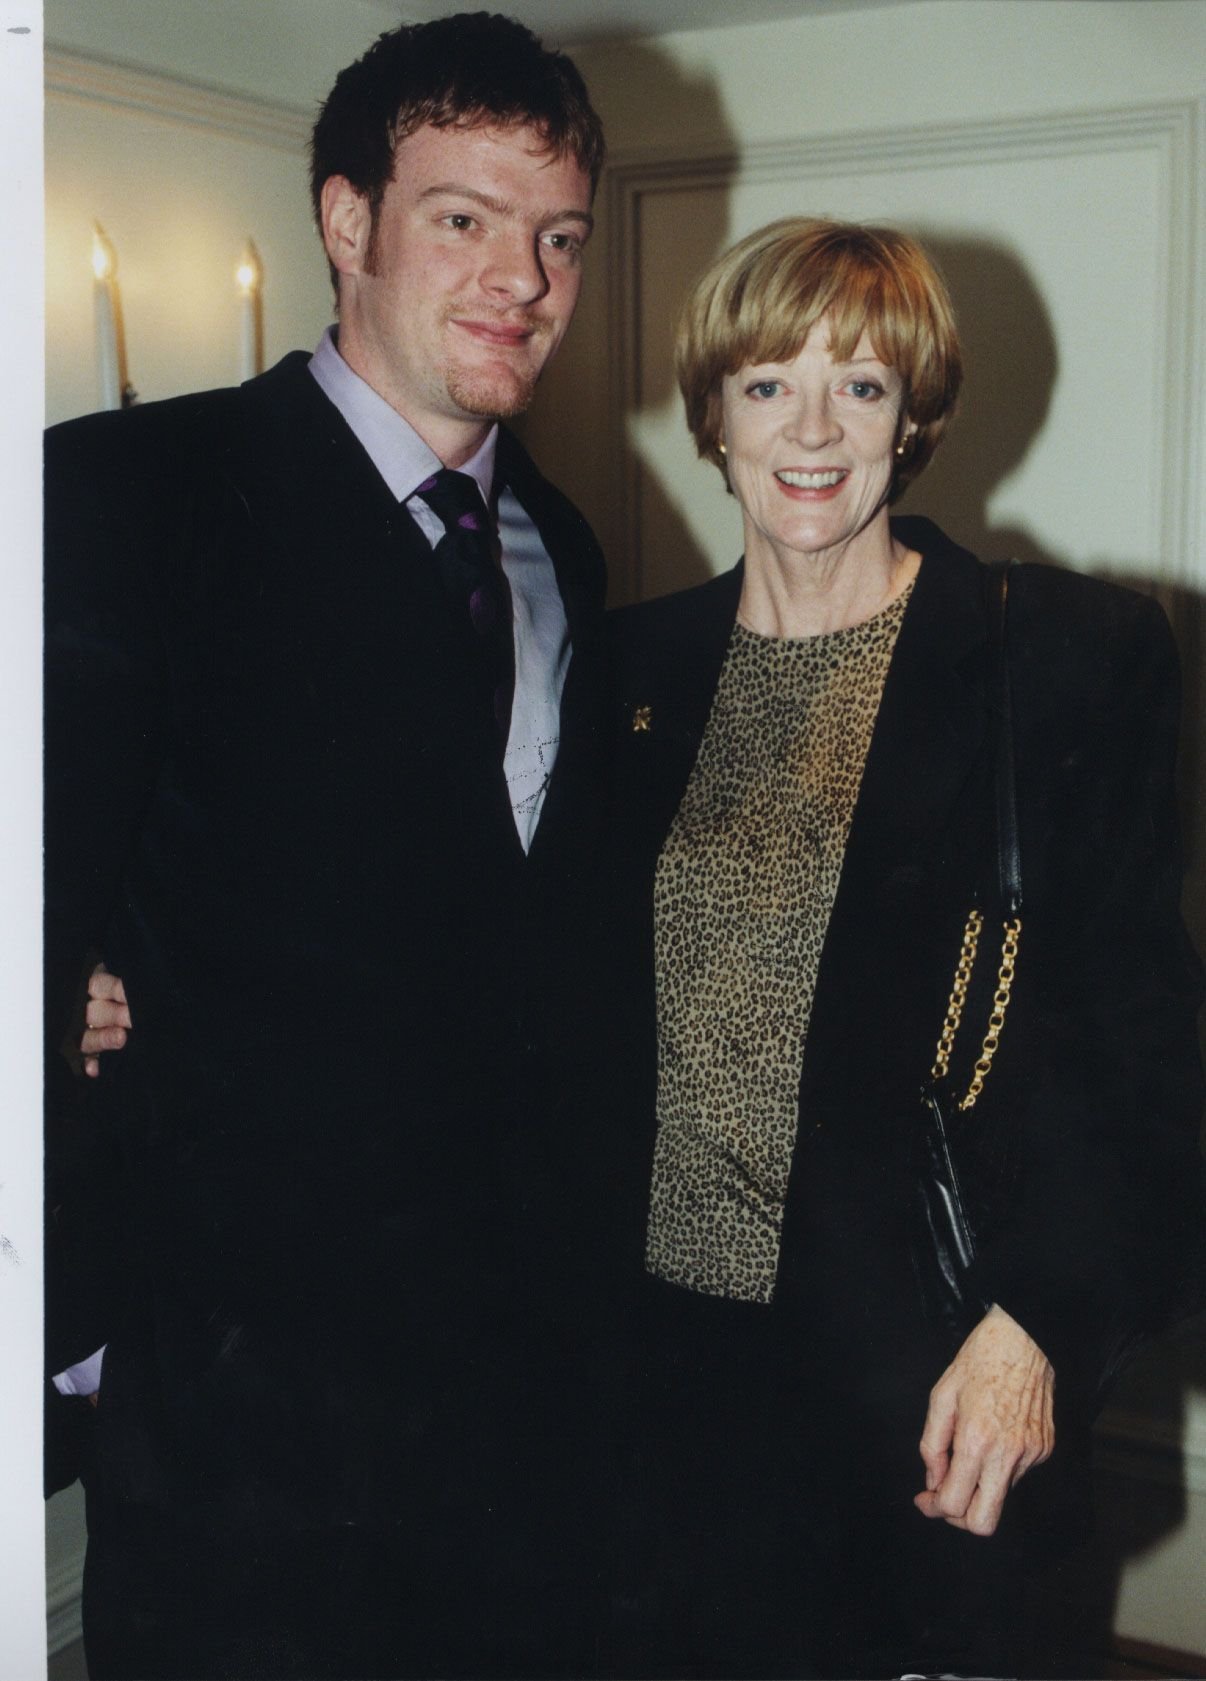 Maggie Smith and her son, Chris Larkin, post for a photo together. | Source: Getty Images